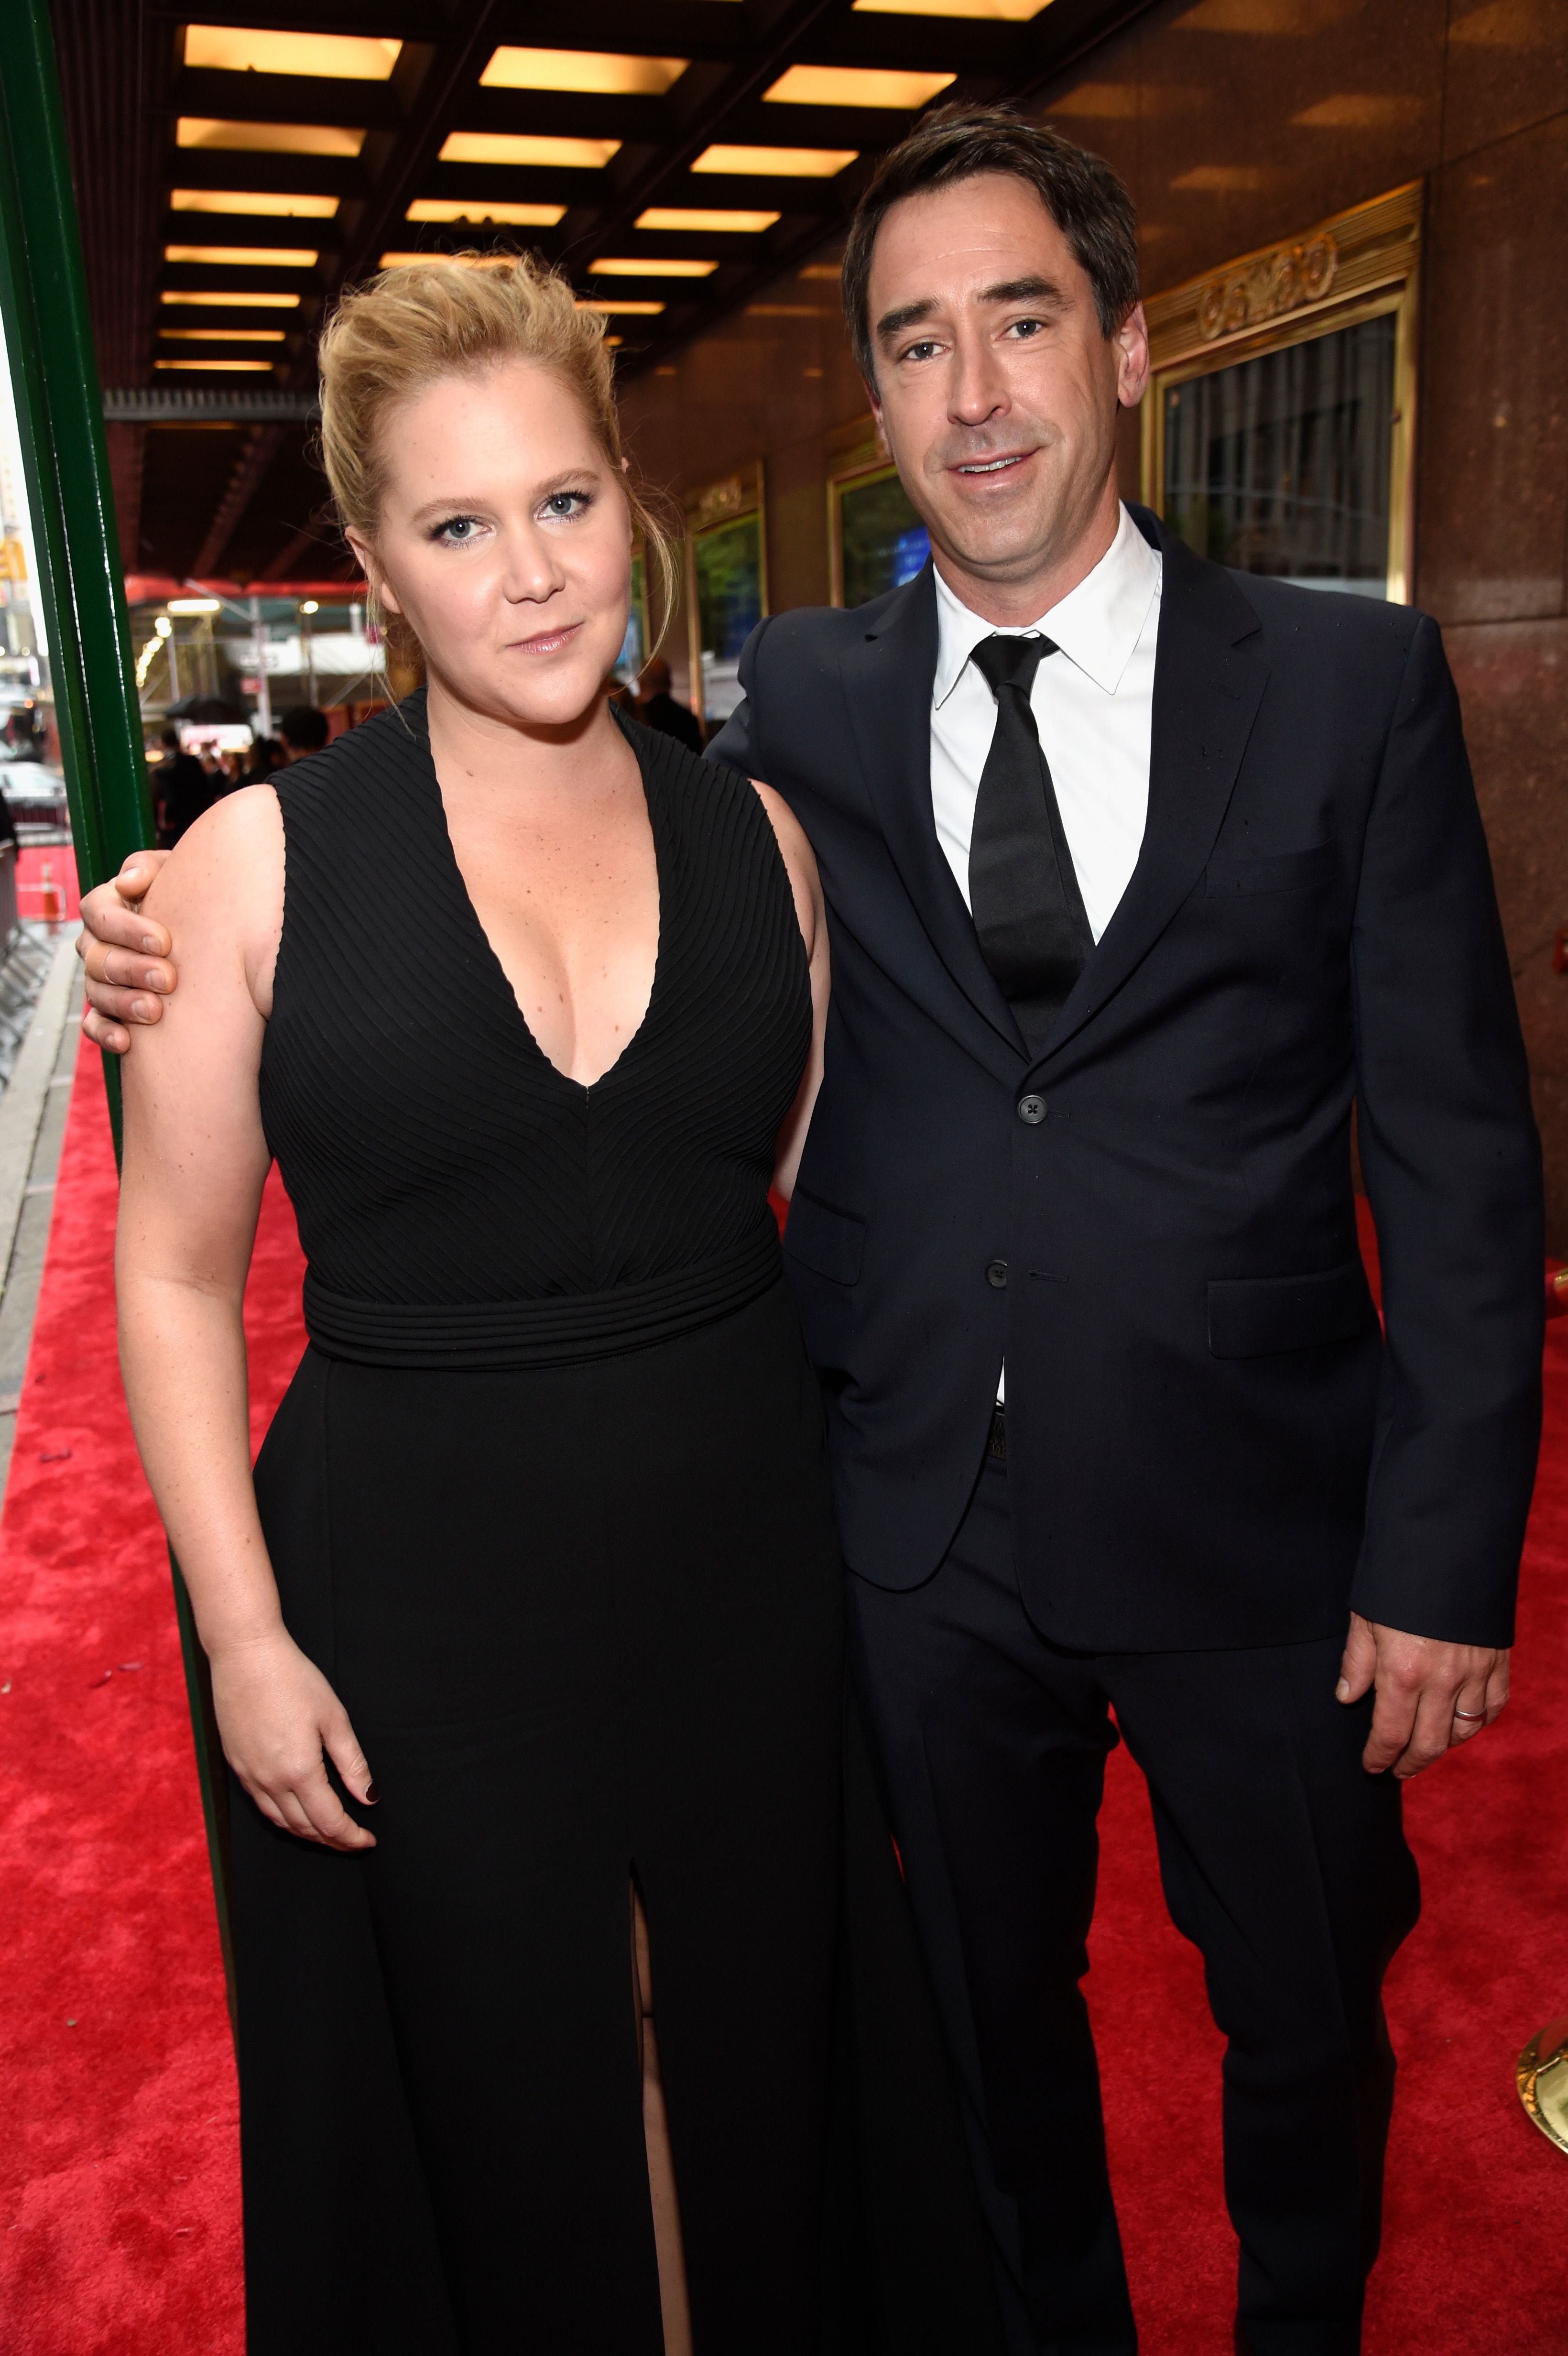 Amy Schumer and Chris Fischer at the 72nd Annual Tony Awards on June 10, 2018, in New York City | Photo: Getty Images